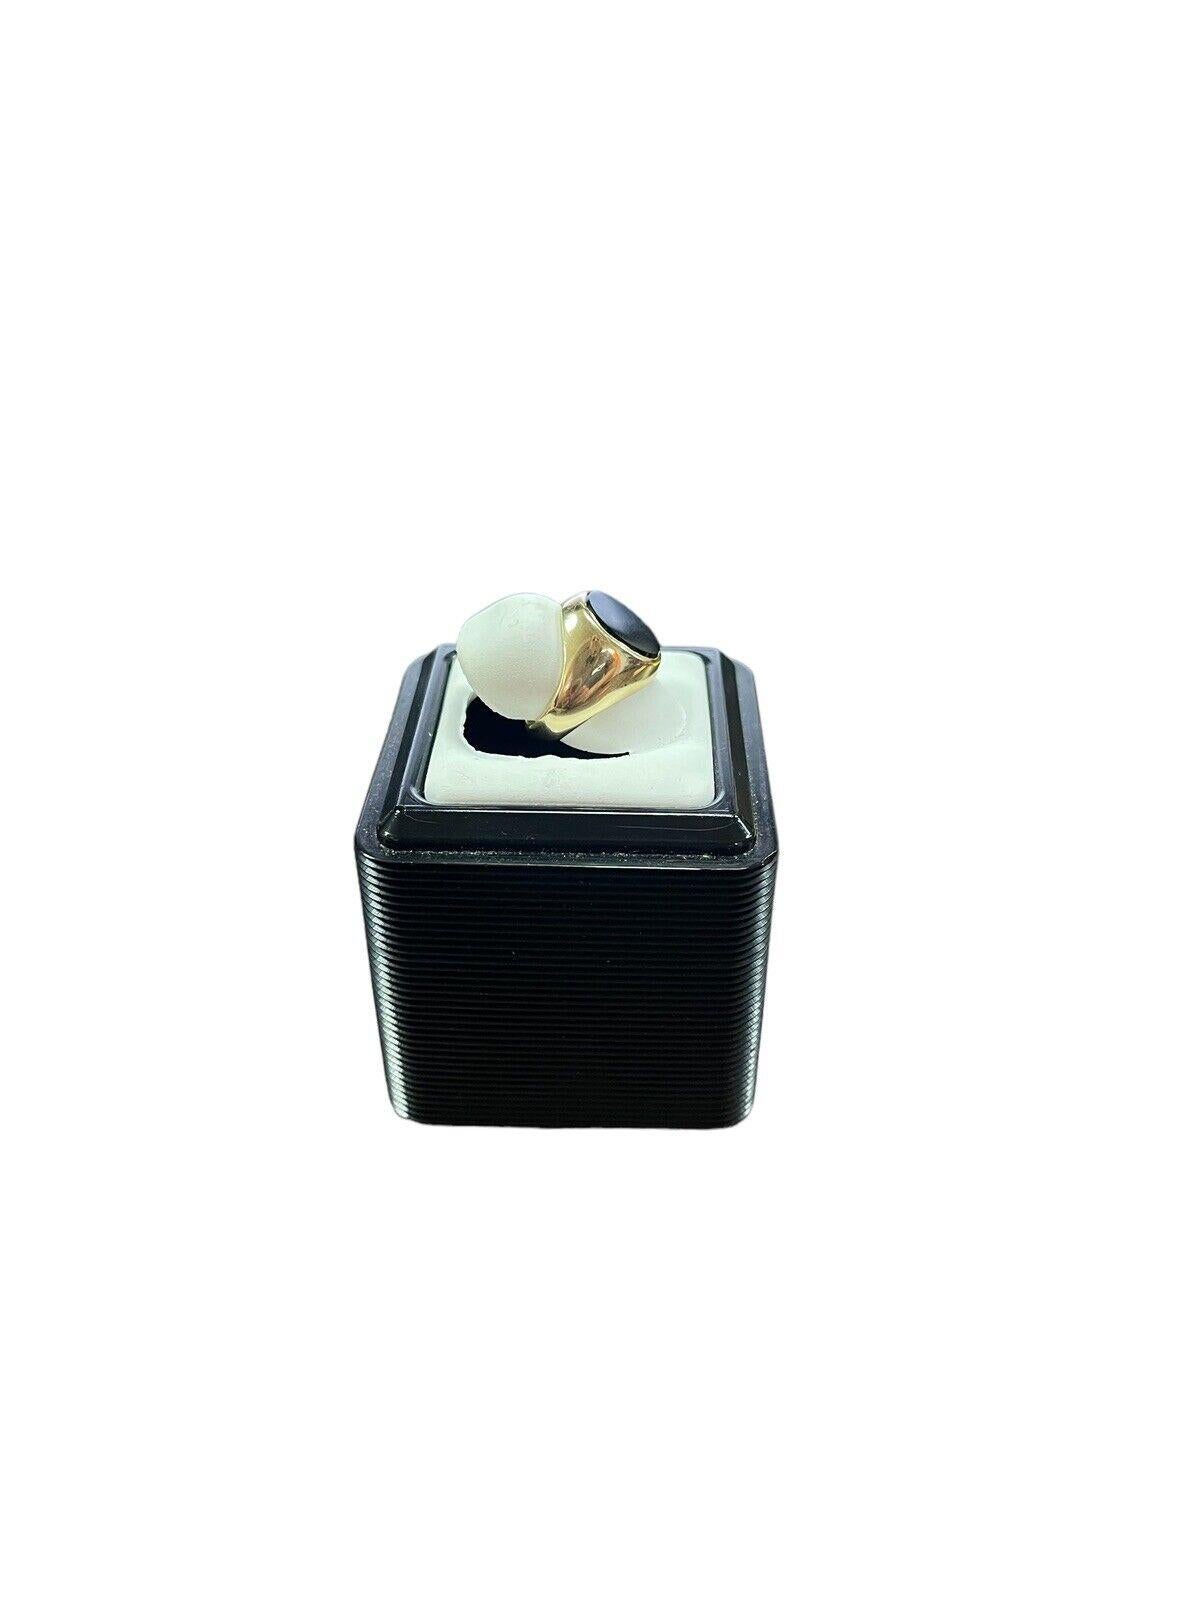 Tiffany & Co. 14k Yellow Gold & Onyx Signet Ring Vintage Retro Circa 1950s

Here is your chance to purchase a beautiful and highly collectible designer signet ring.  

Vintage Tiffany & Co. 14k yellow gold & onyx signet ring, retro circa 1950s. 